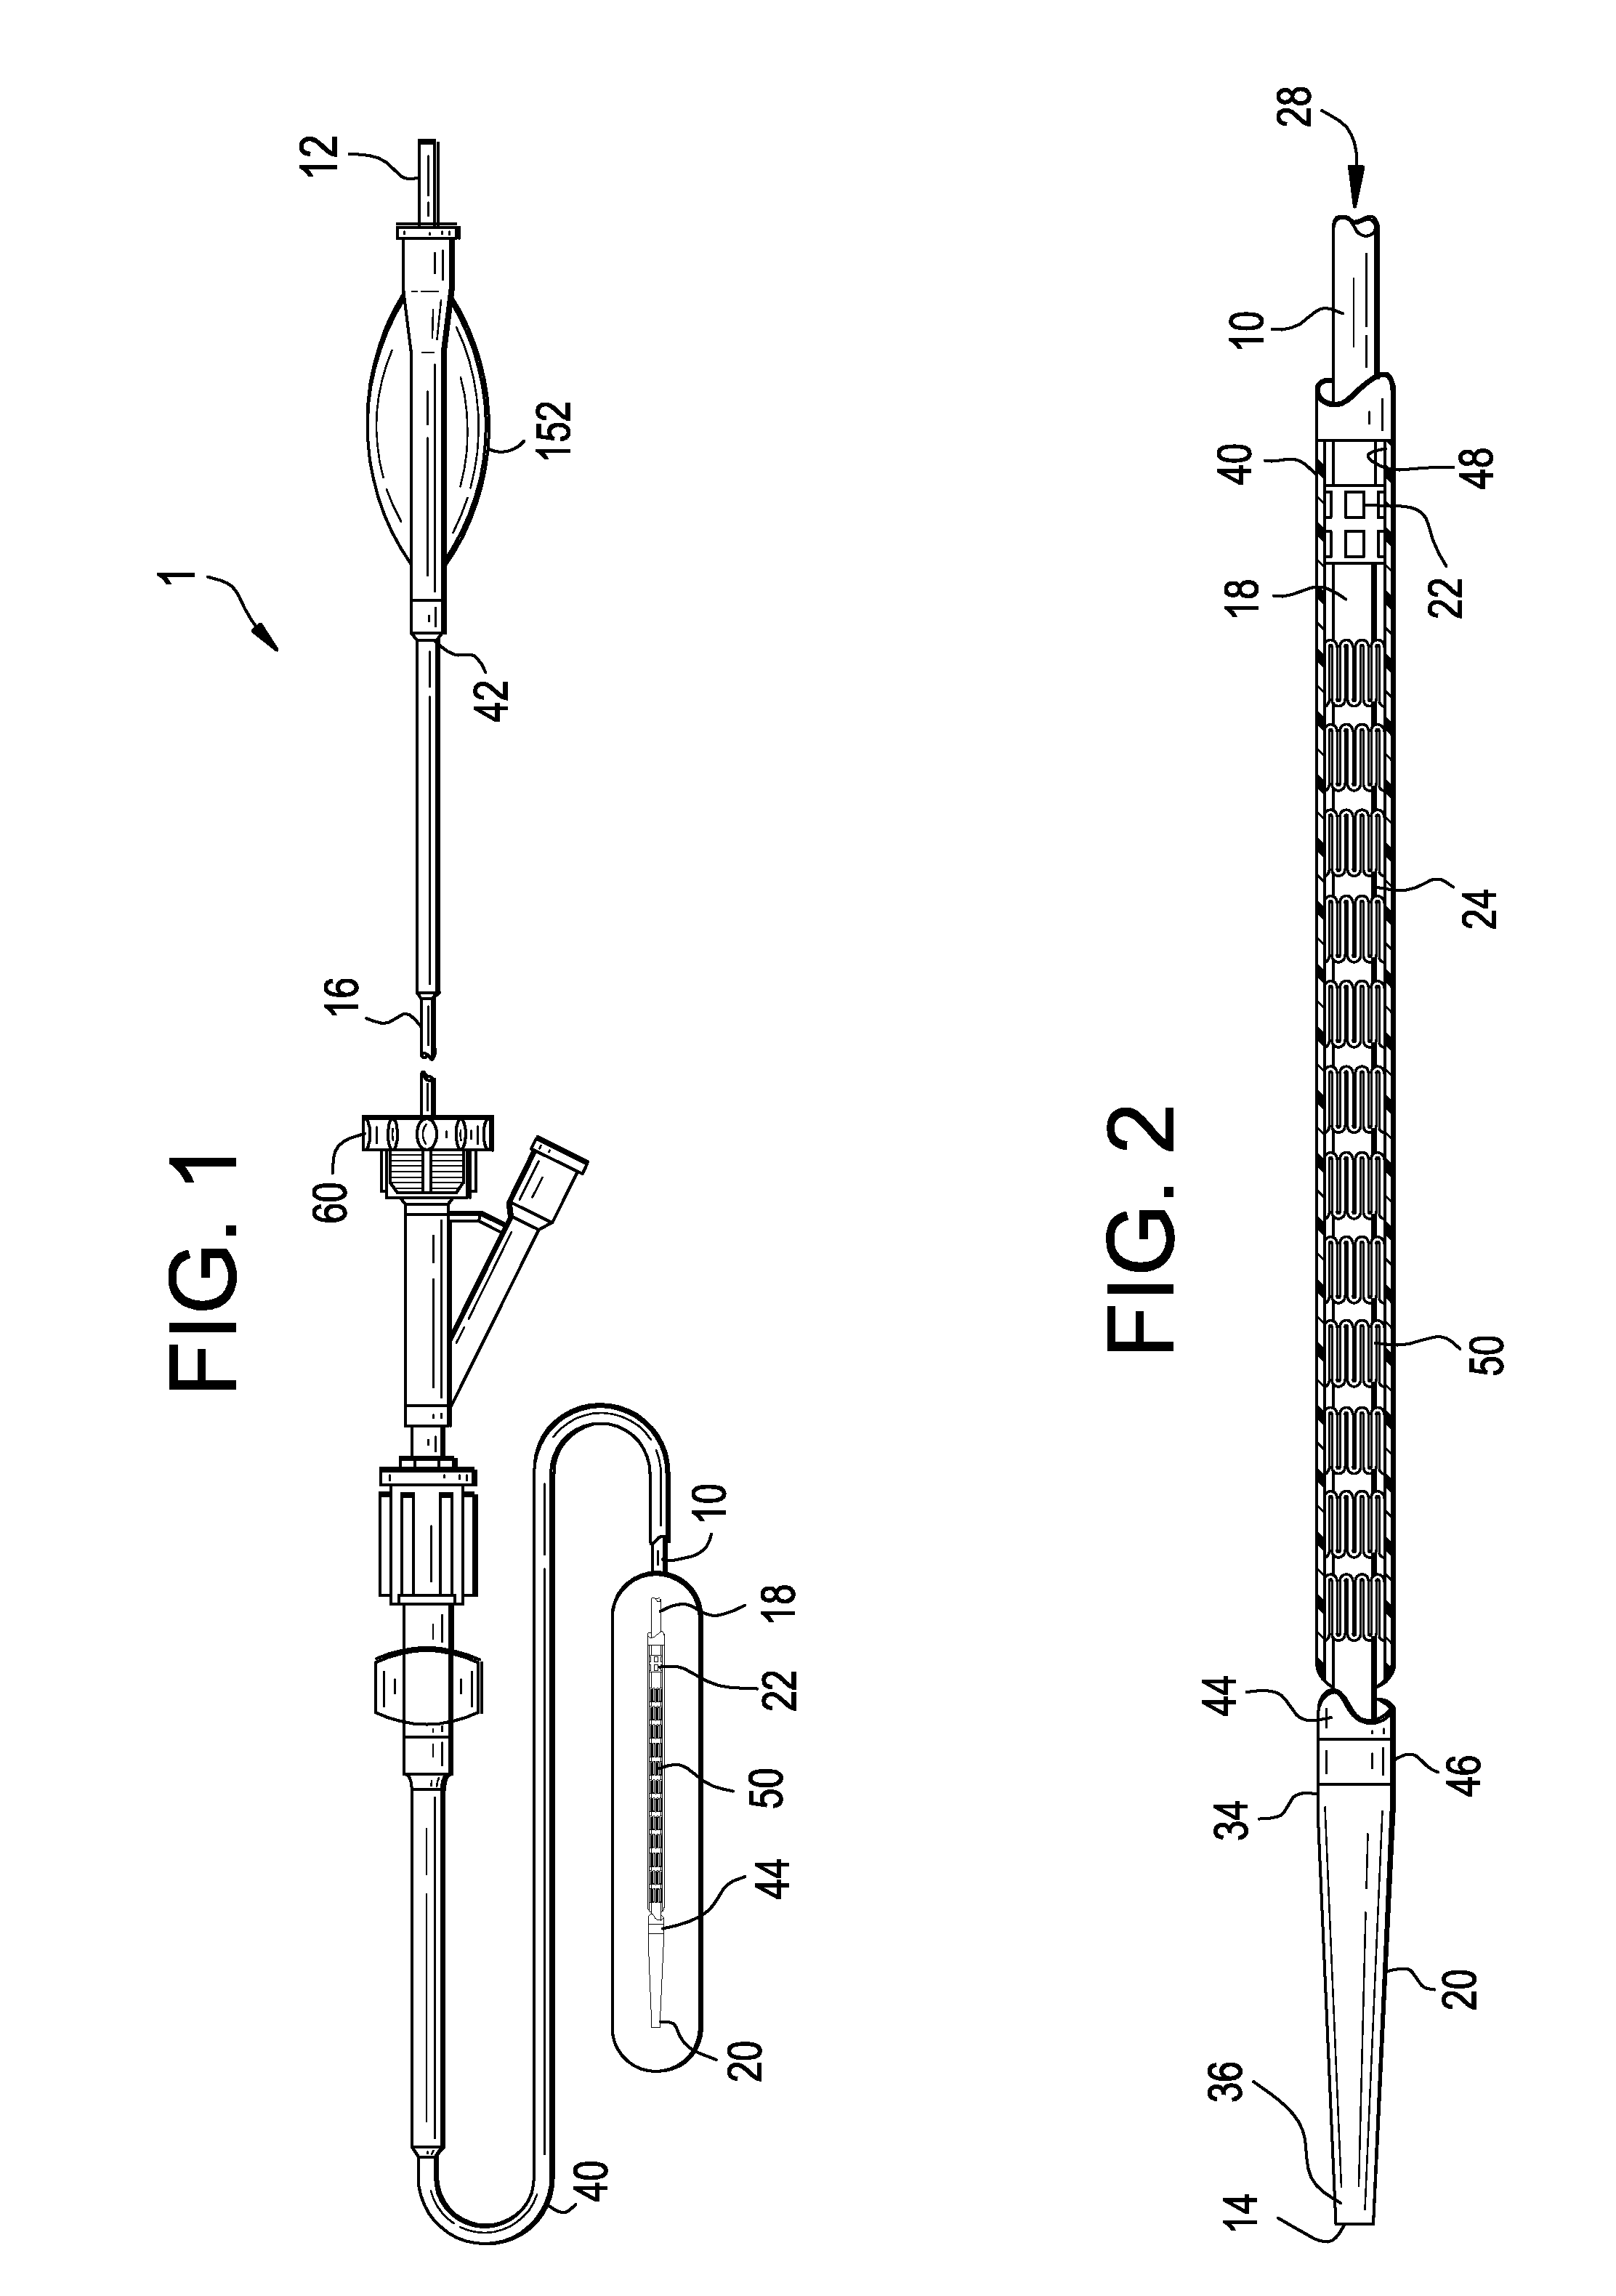 Intravascular stent having imrproved design for loading and deploying